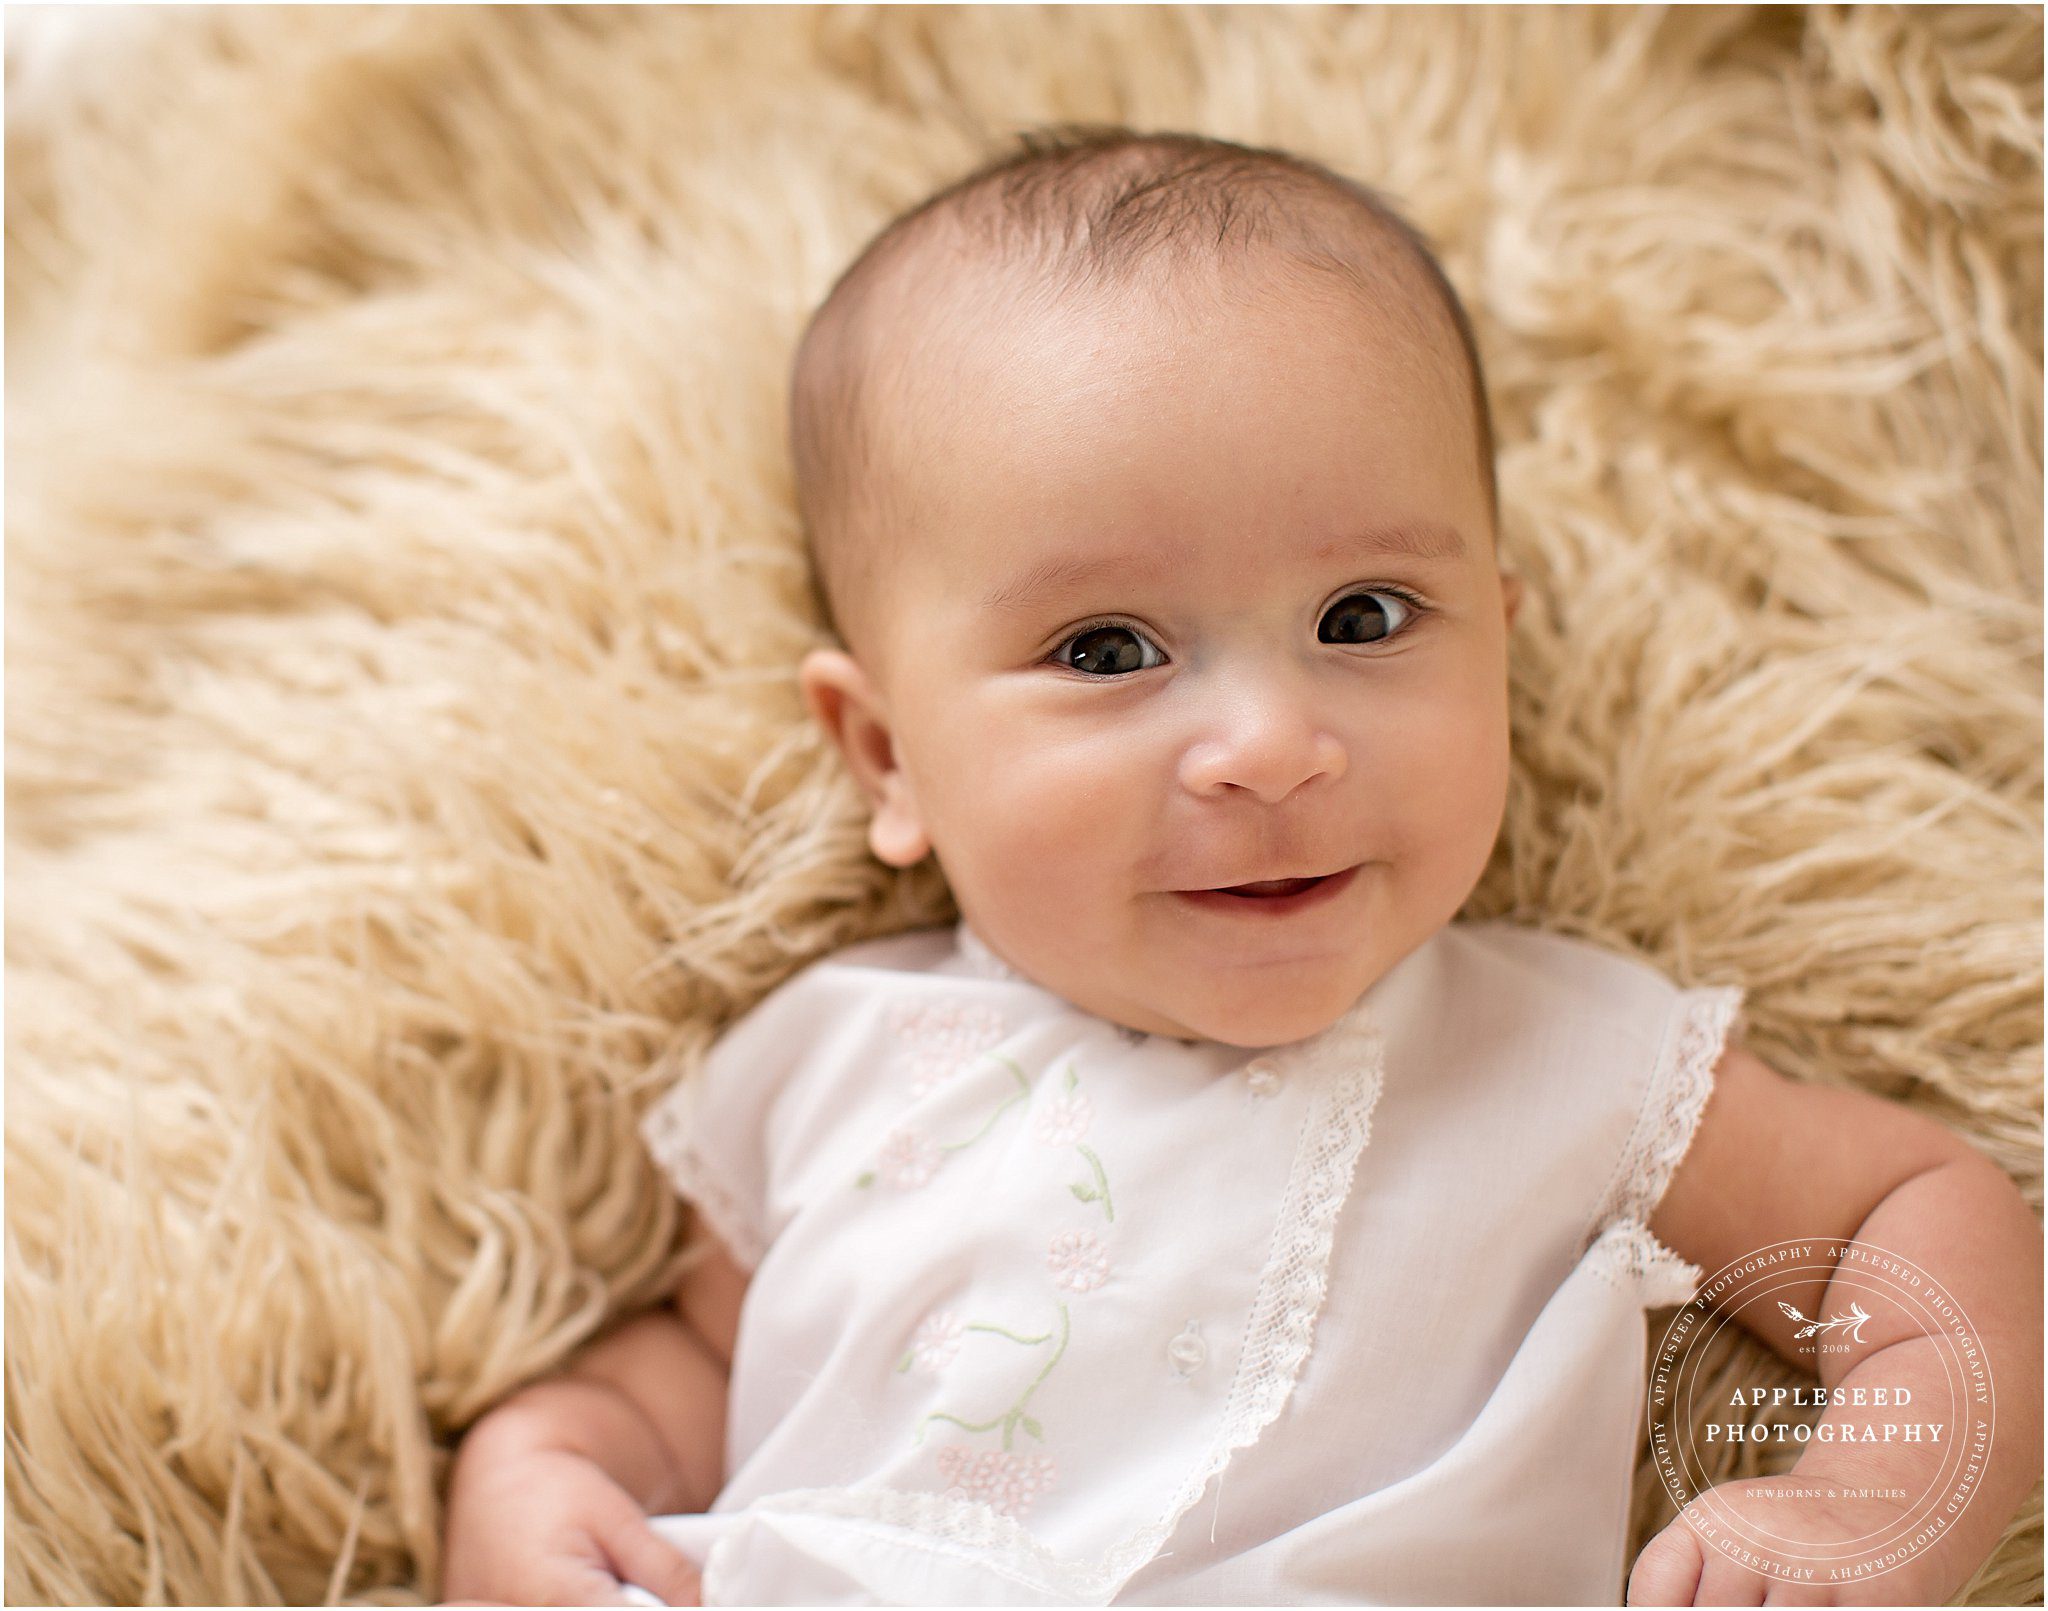 4 Months Old | Atlanta Baby Photographer | Appleseed Photography